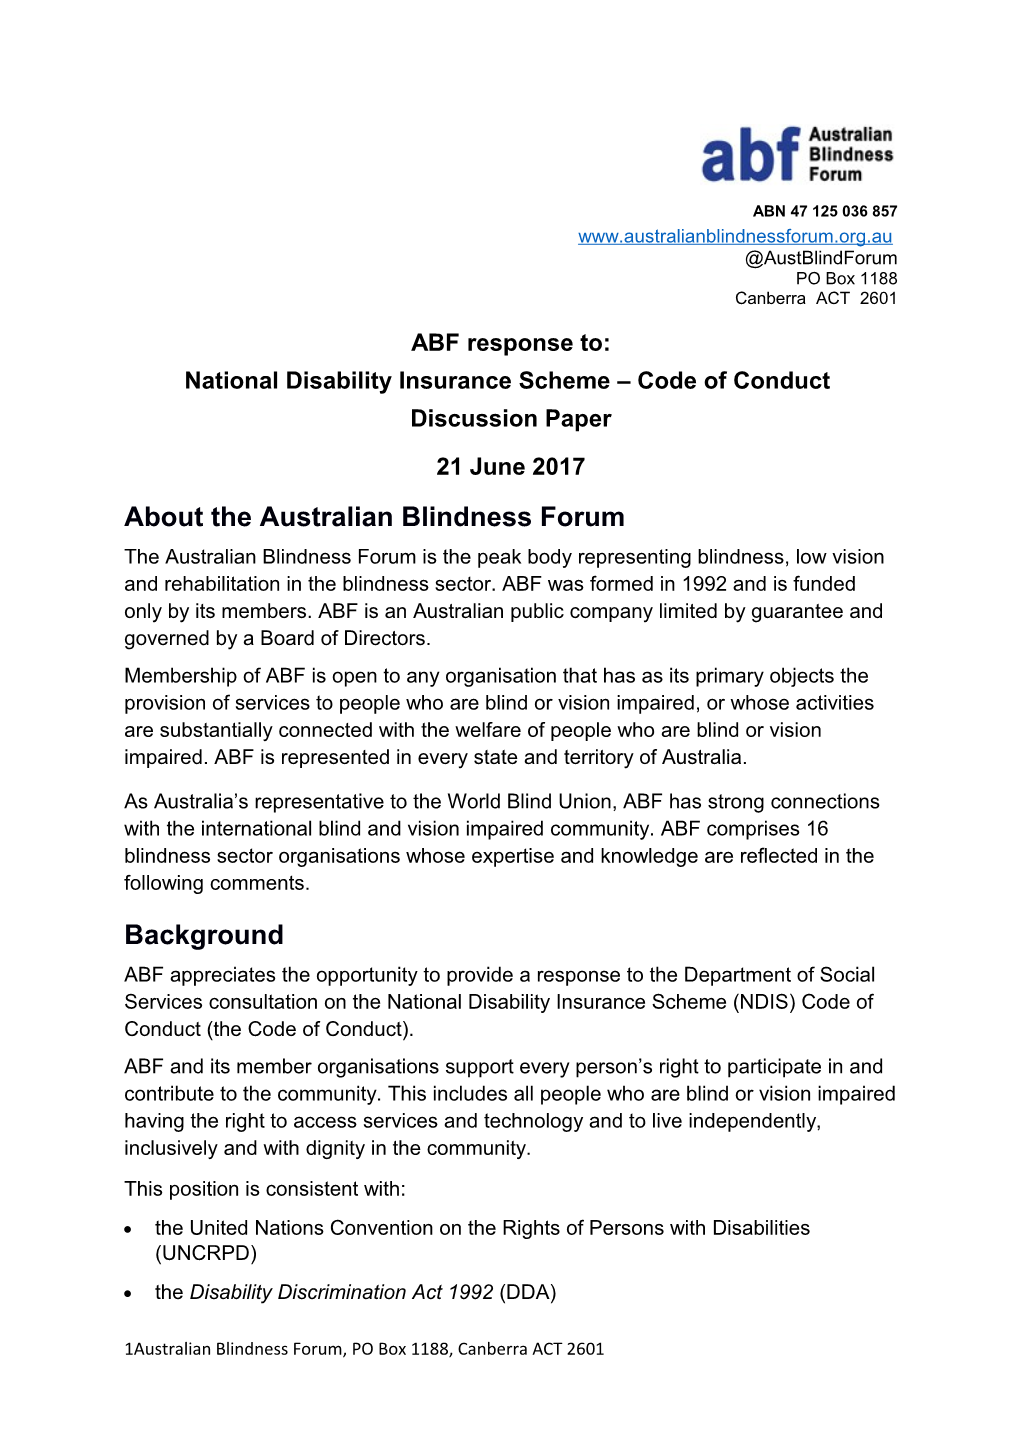 National Disability Insurance Scheme Code of Conduct